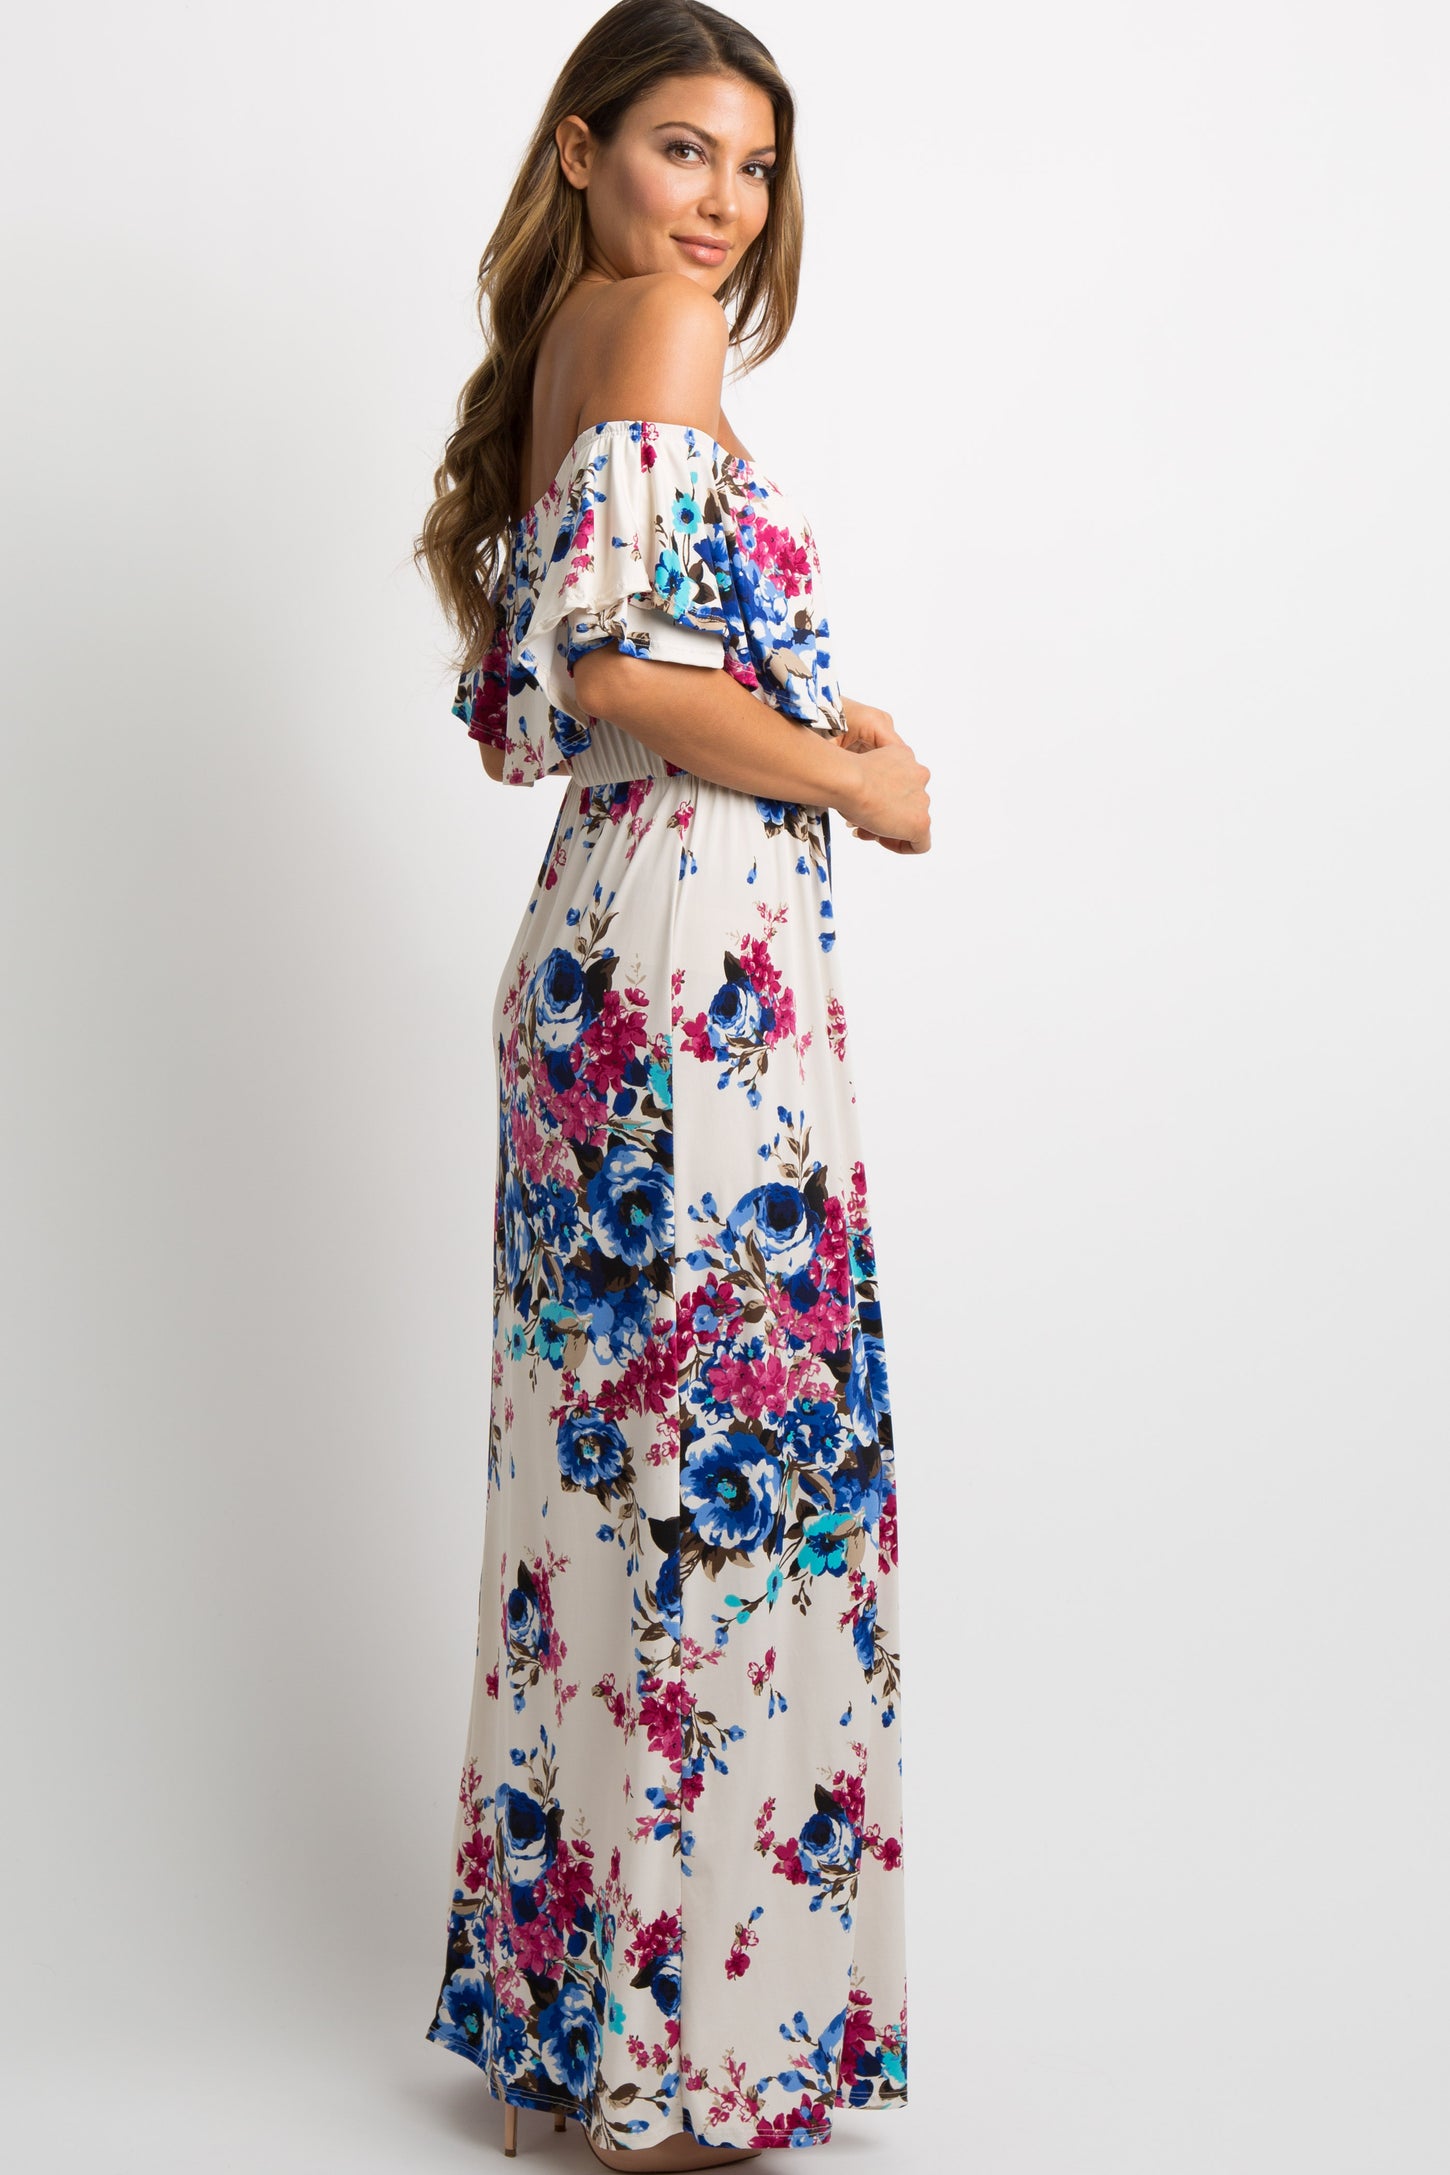 PinkBlush Ivory Floral Ruffle Off Shoulder Maxi Dress